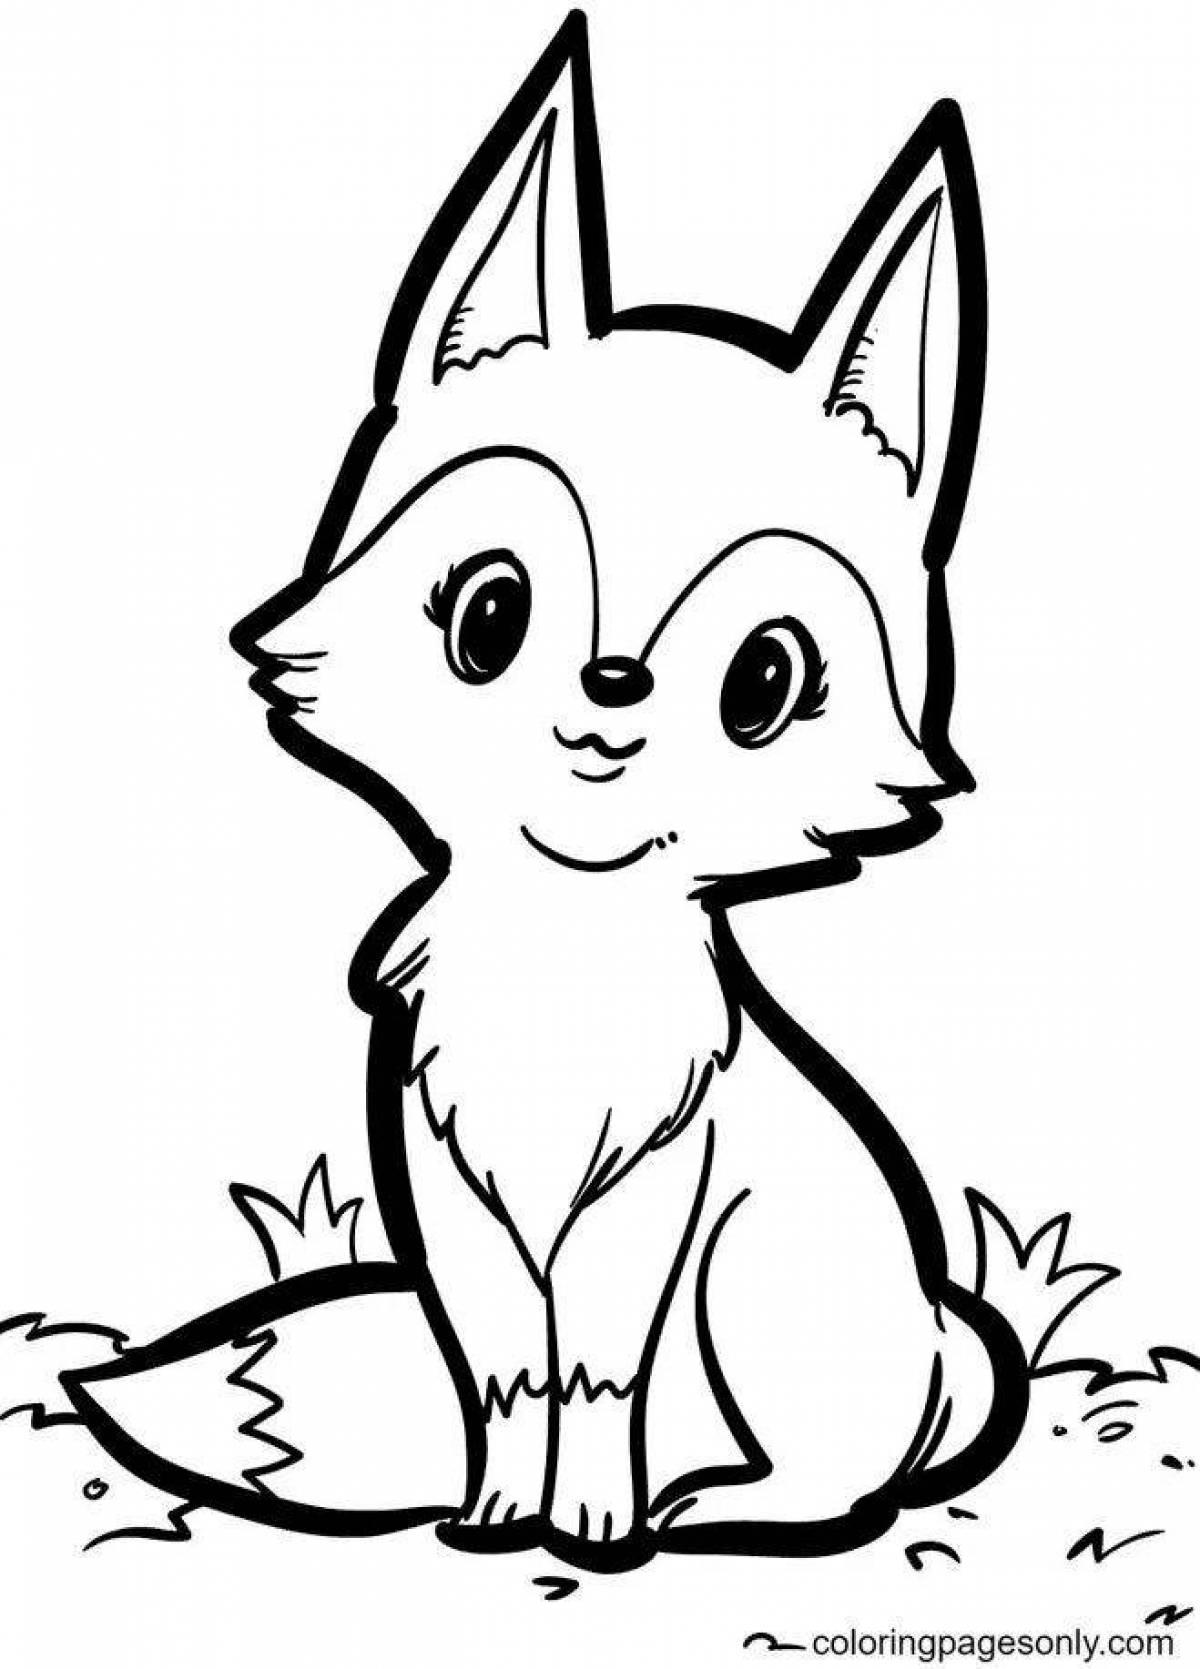 Coloring funny fox for kids